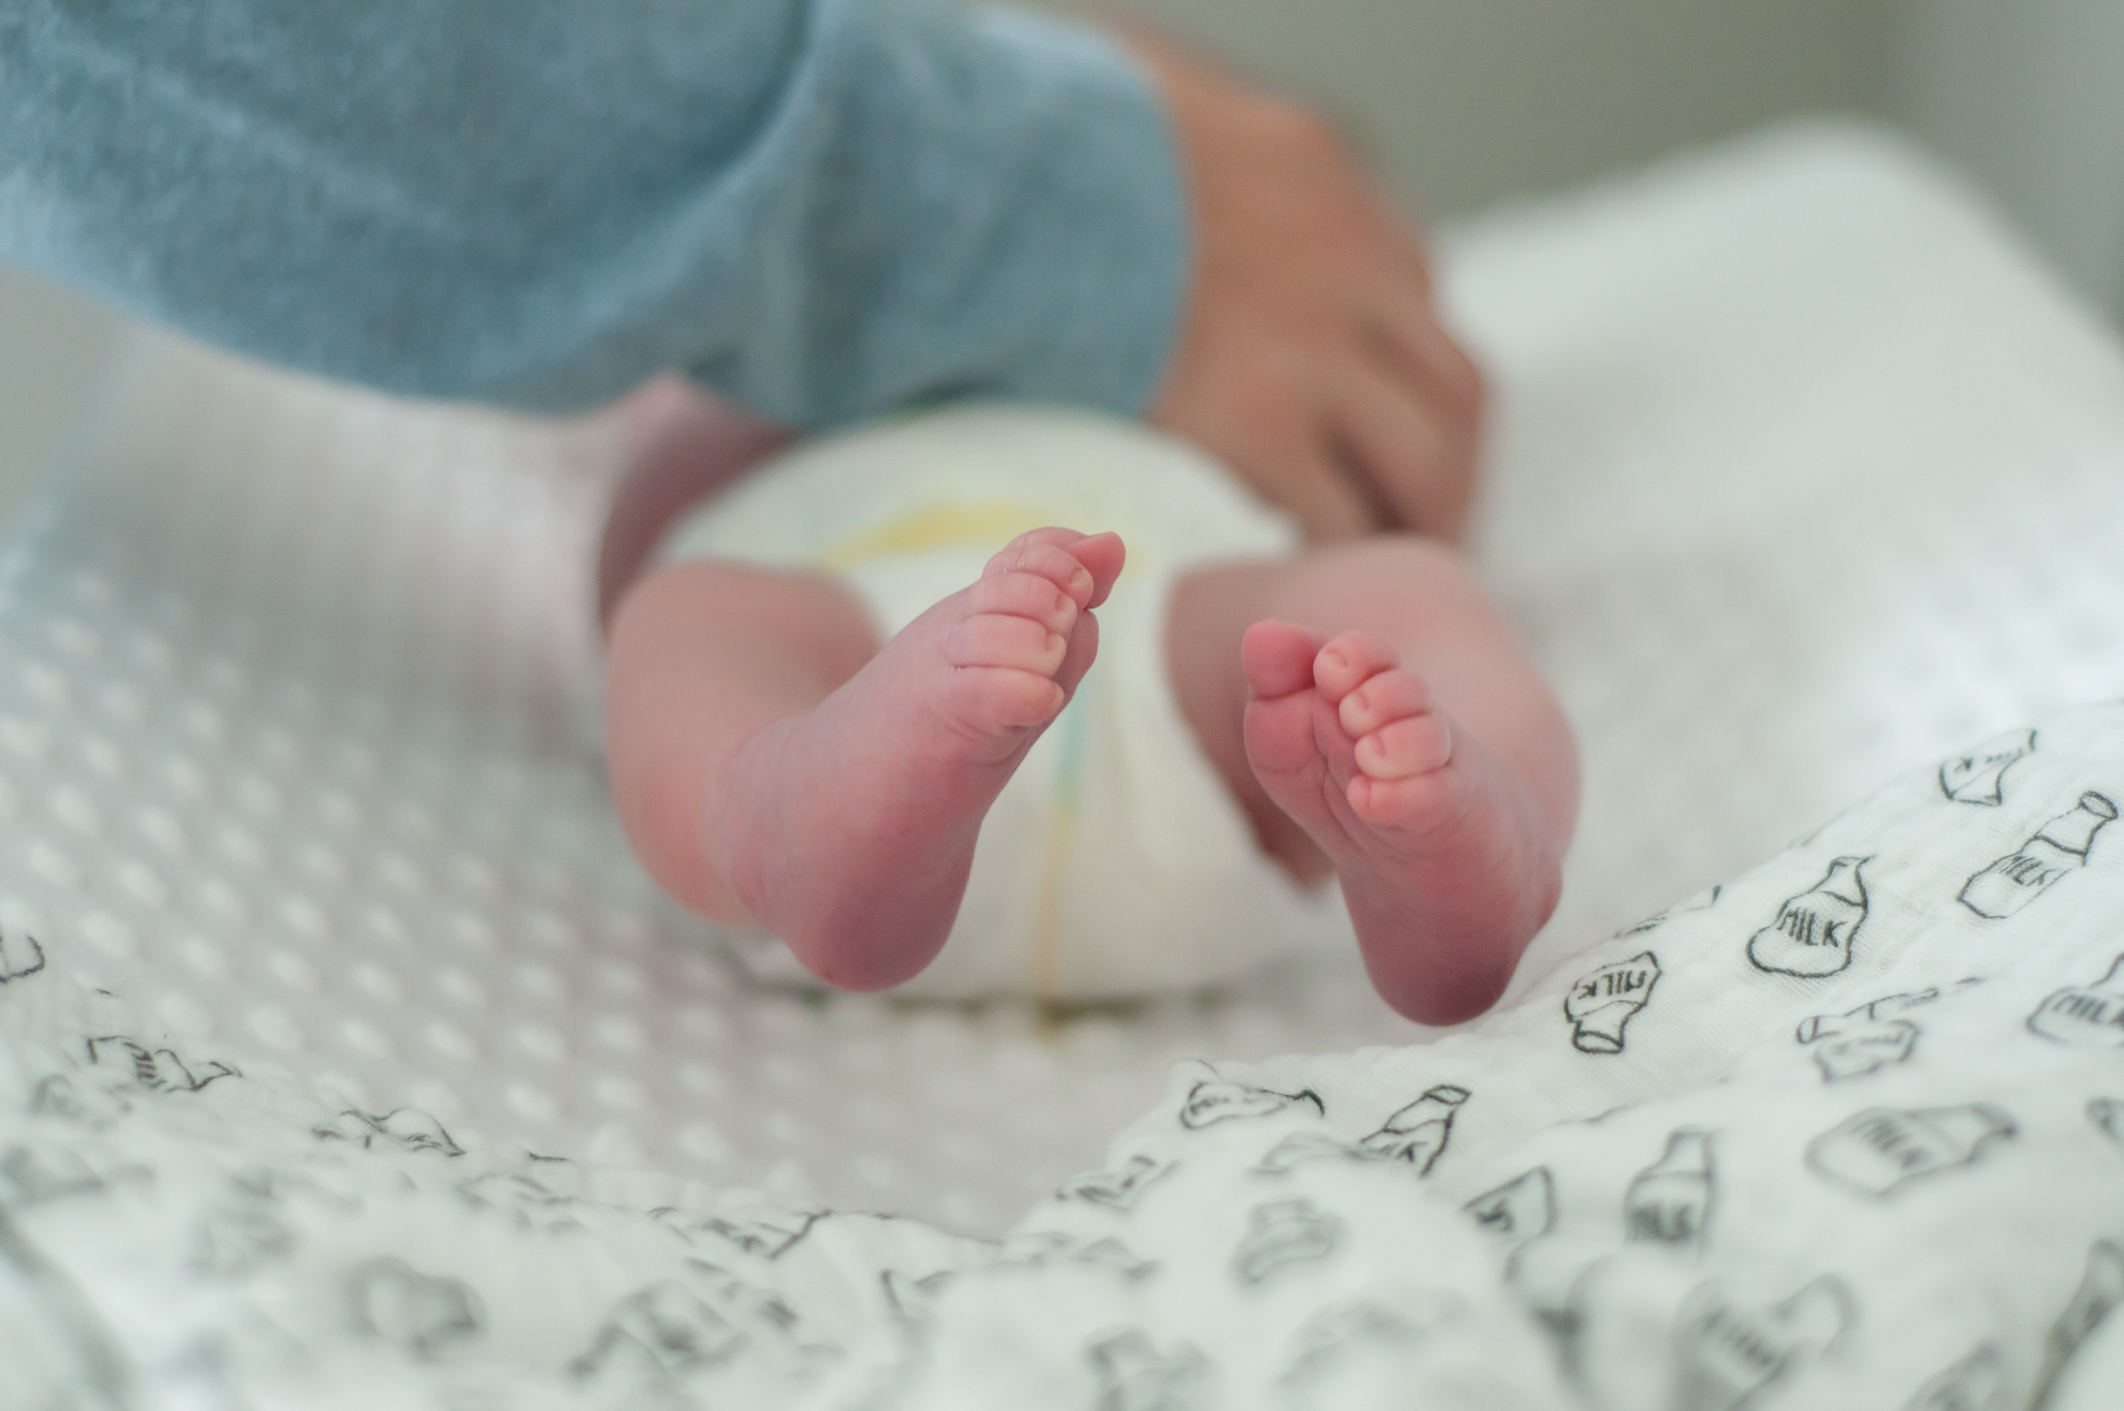 Adult&#x27;s hands gently holding a baby&#x27;s bare feet, with baby lying on a patterned surface